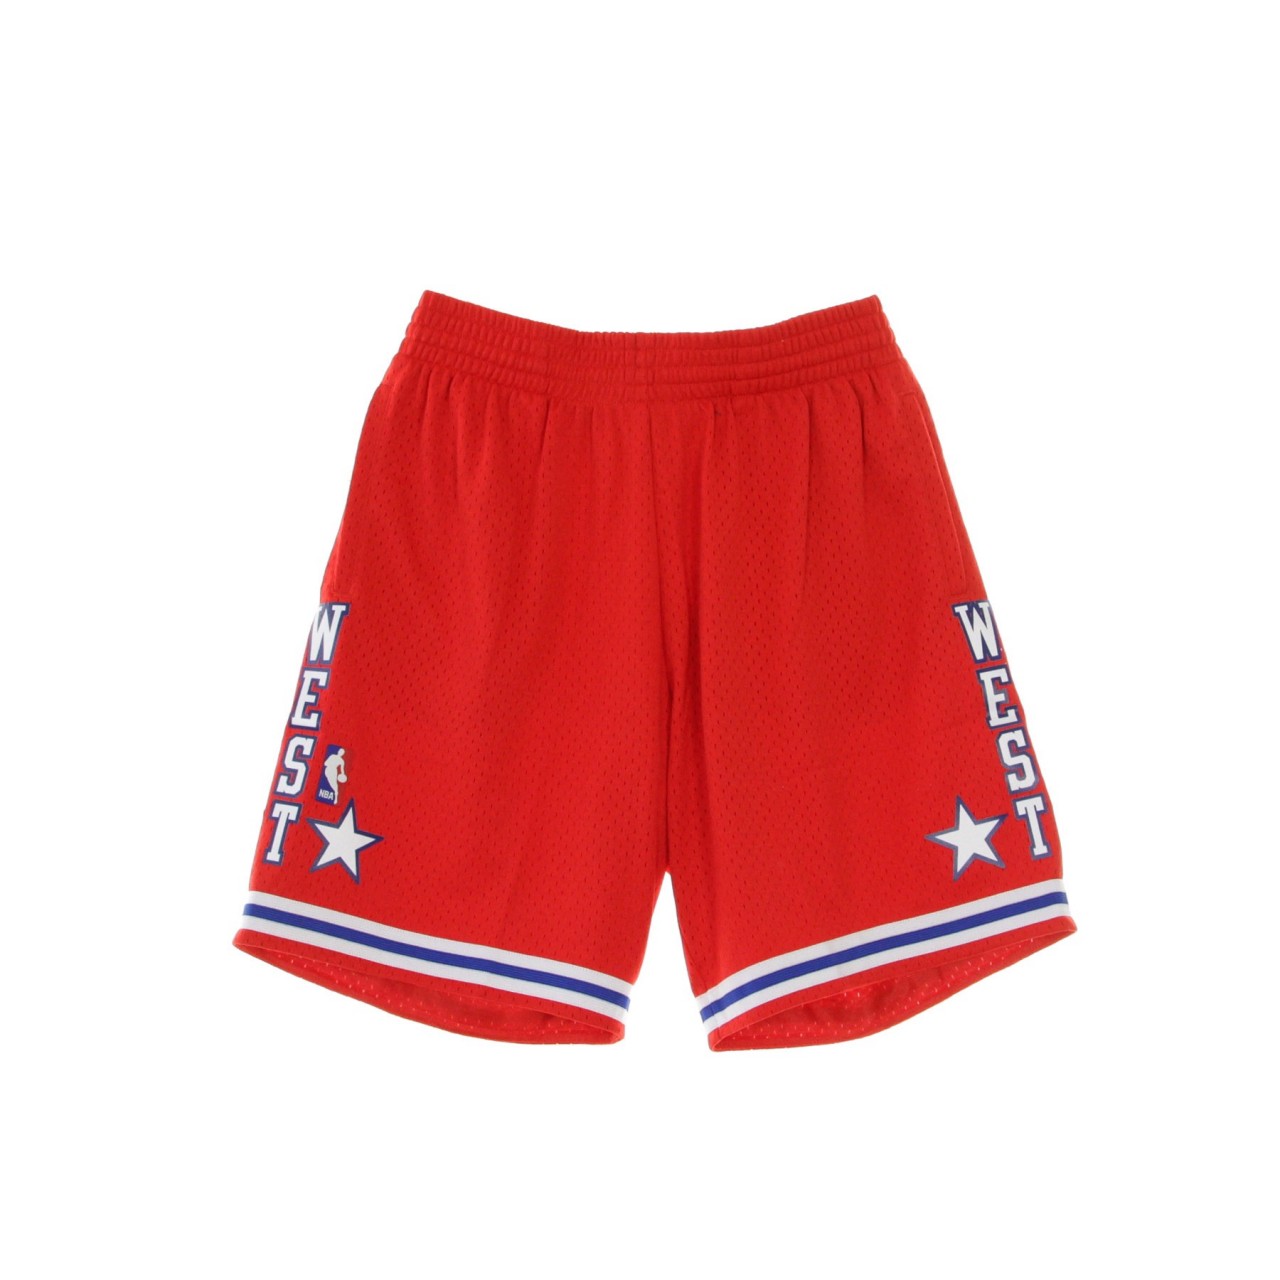 MITCHELL & NESS NBA SWINGMAN SHORT ALL STAR GAME WEST 1988 SMSHCP19053-ASWRED188